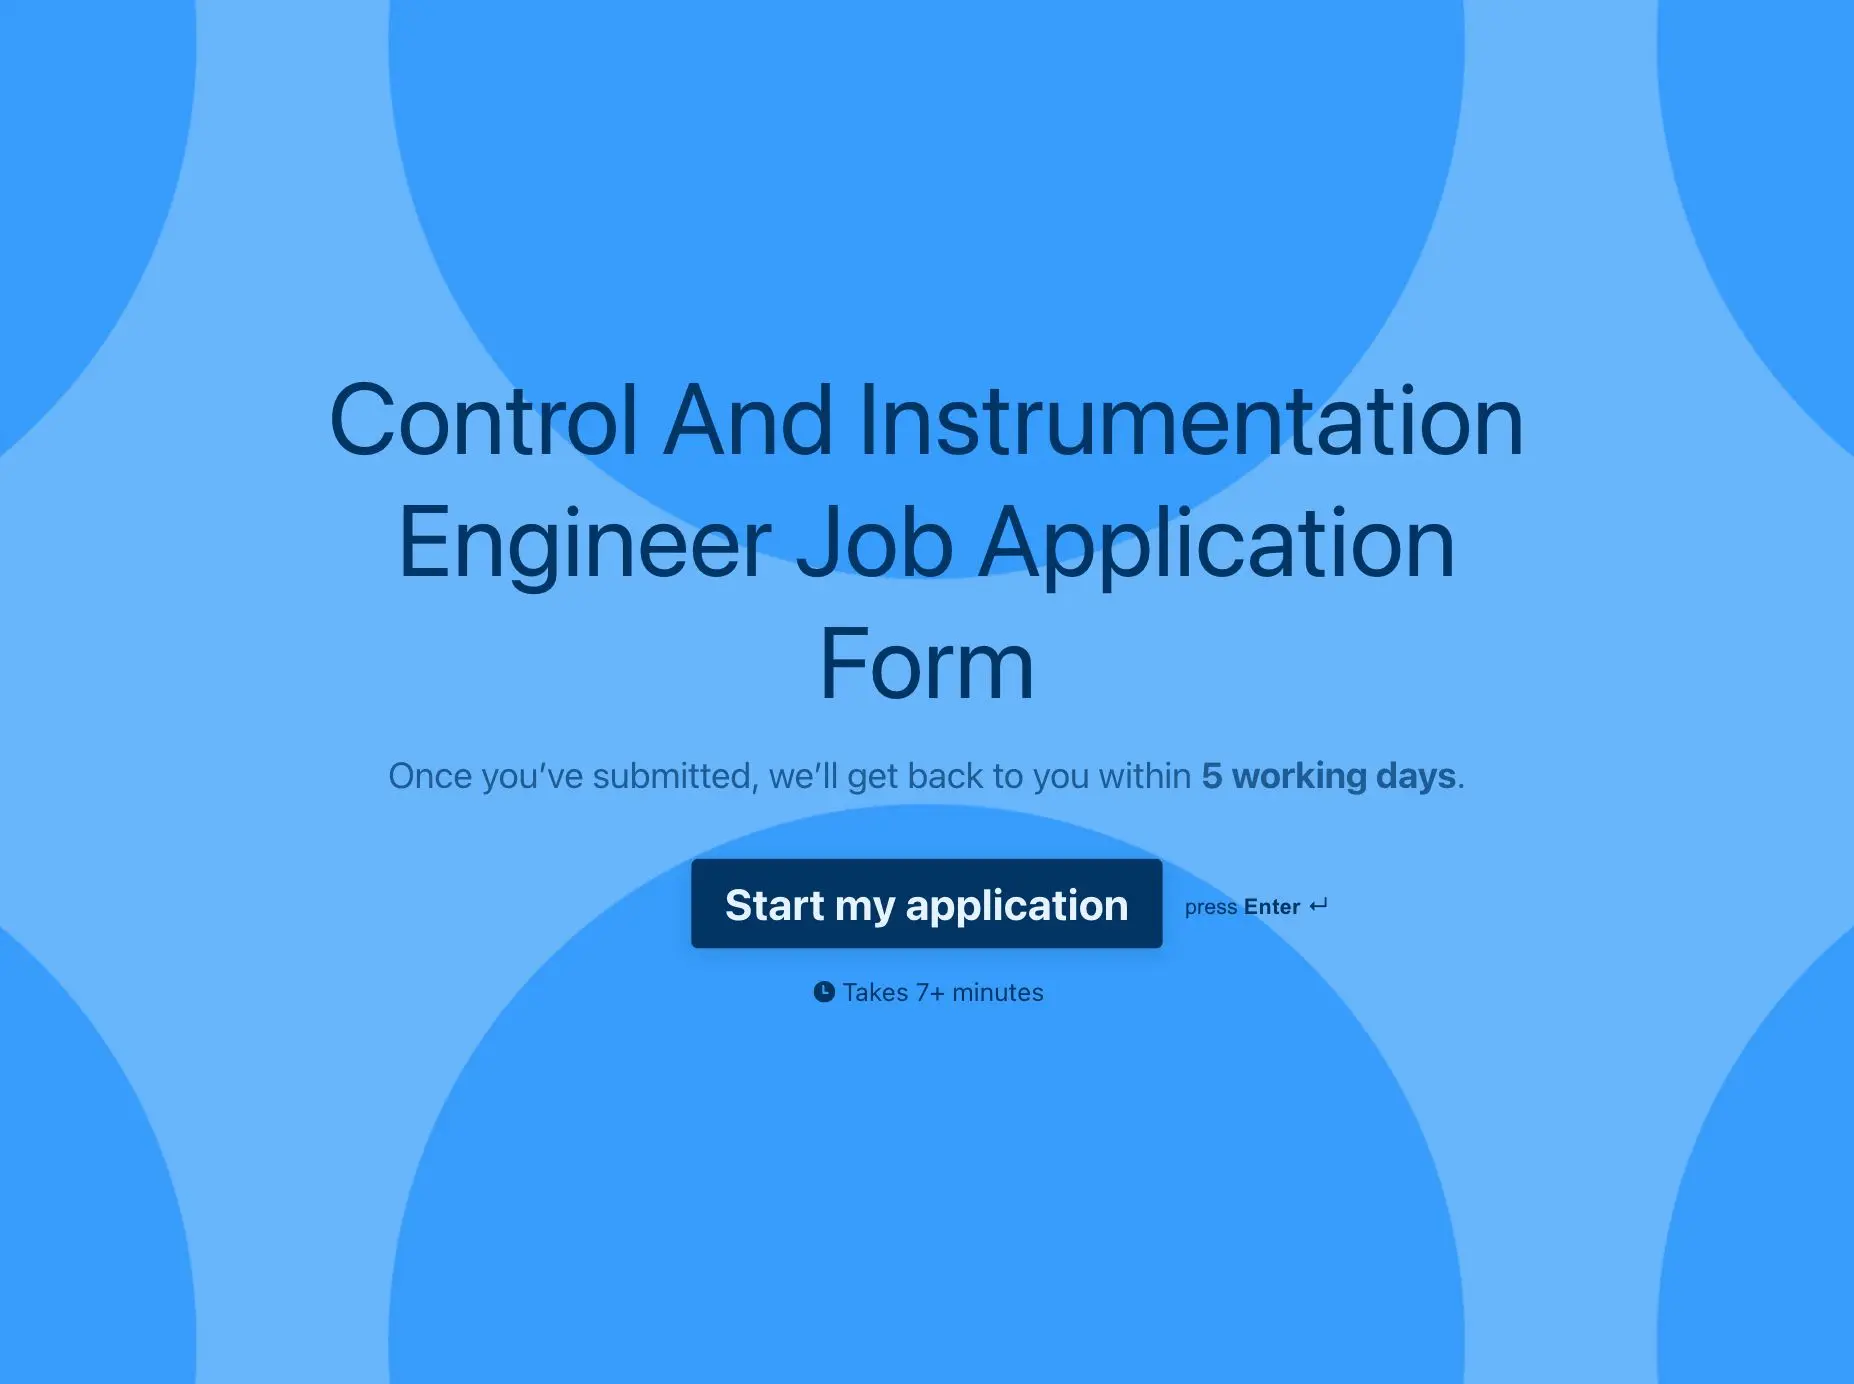 Control And Instrumentation Engineer Job Application Form Template Hero